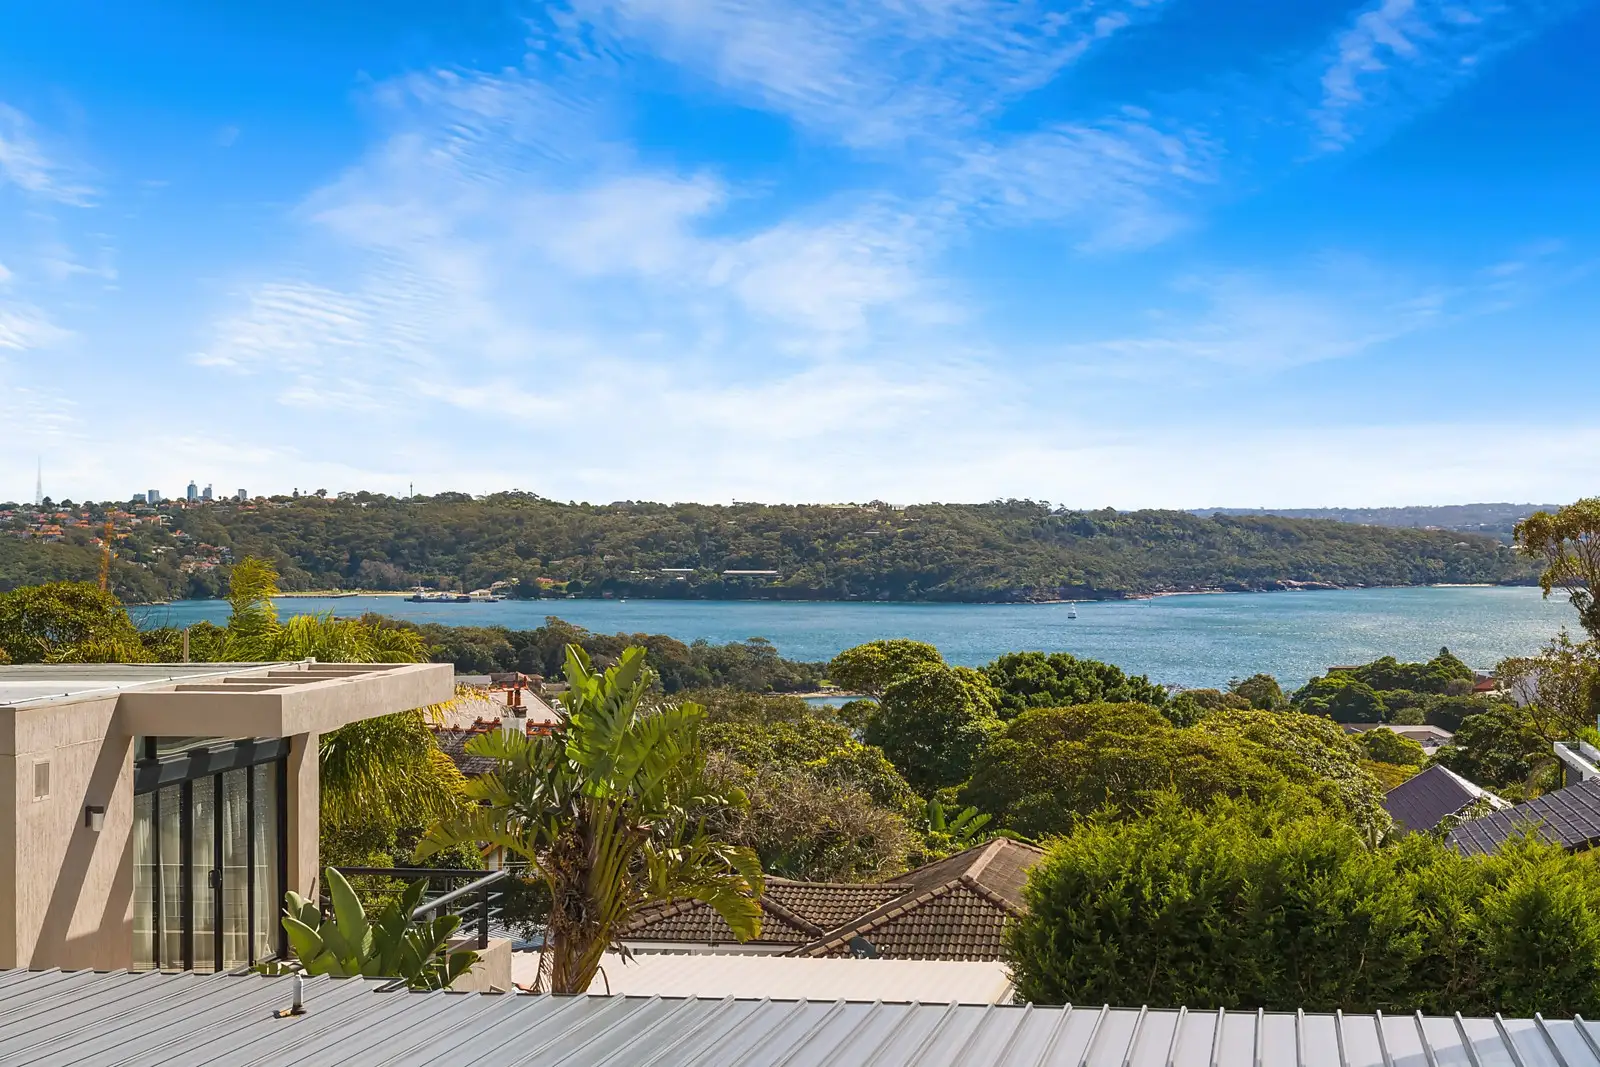 Photo #2: 11 Serpentine Parade, Vaucluse - Sold by Sydney Sotheby's International Realty